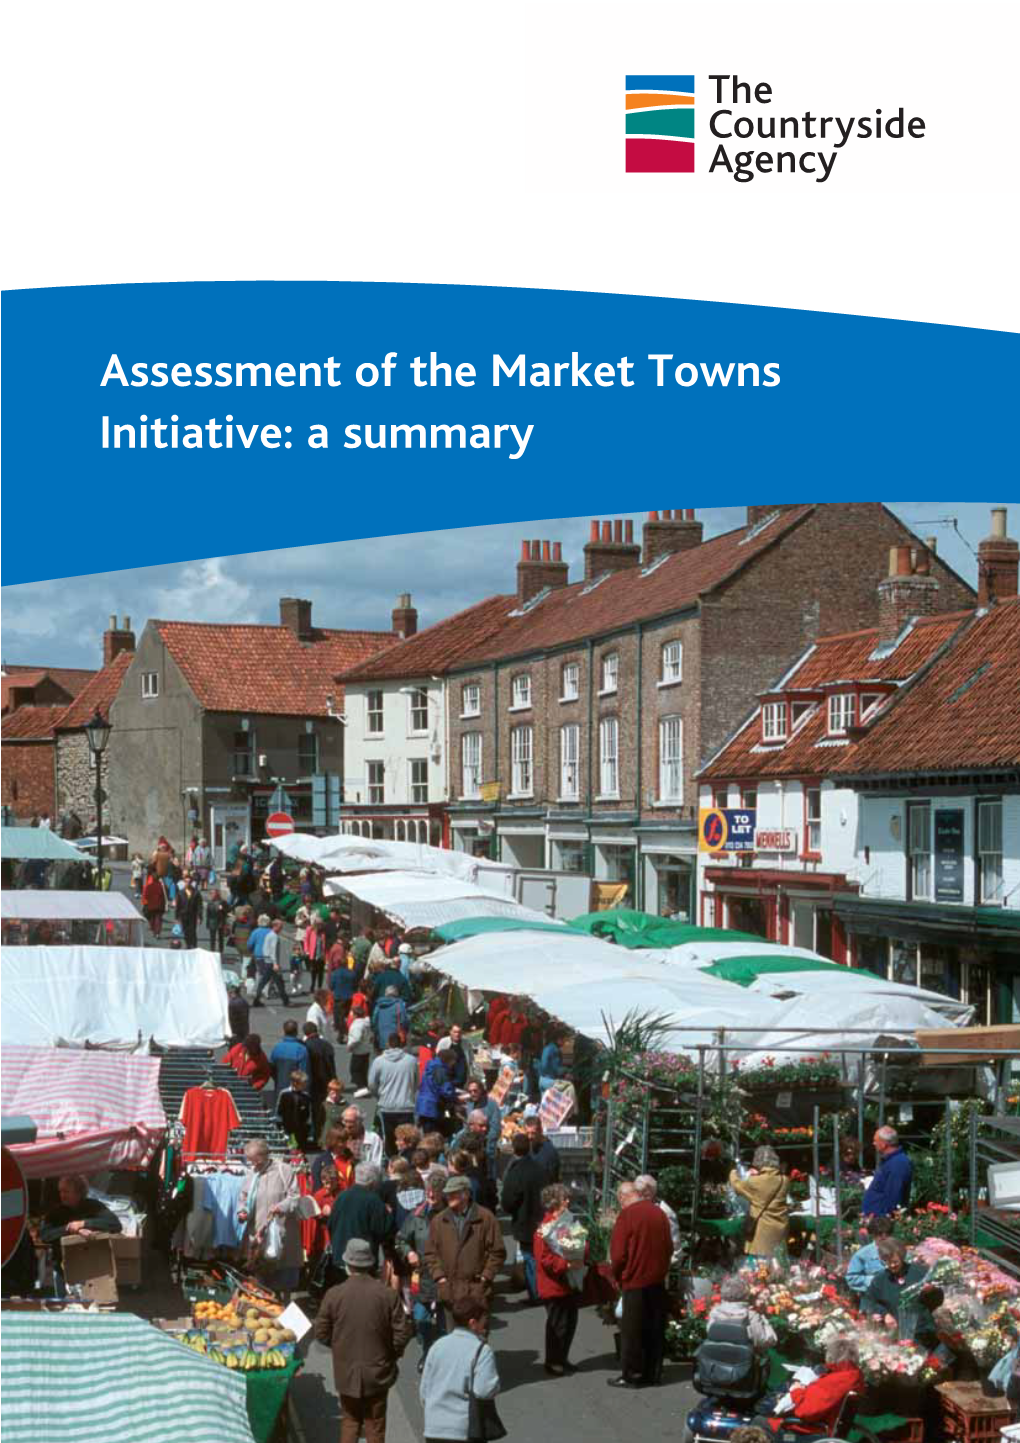 Assessment of the Market Towns Initiative: a Summary